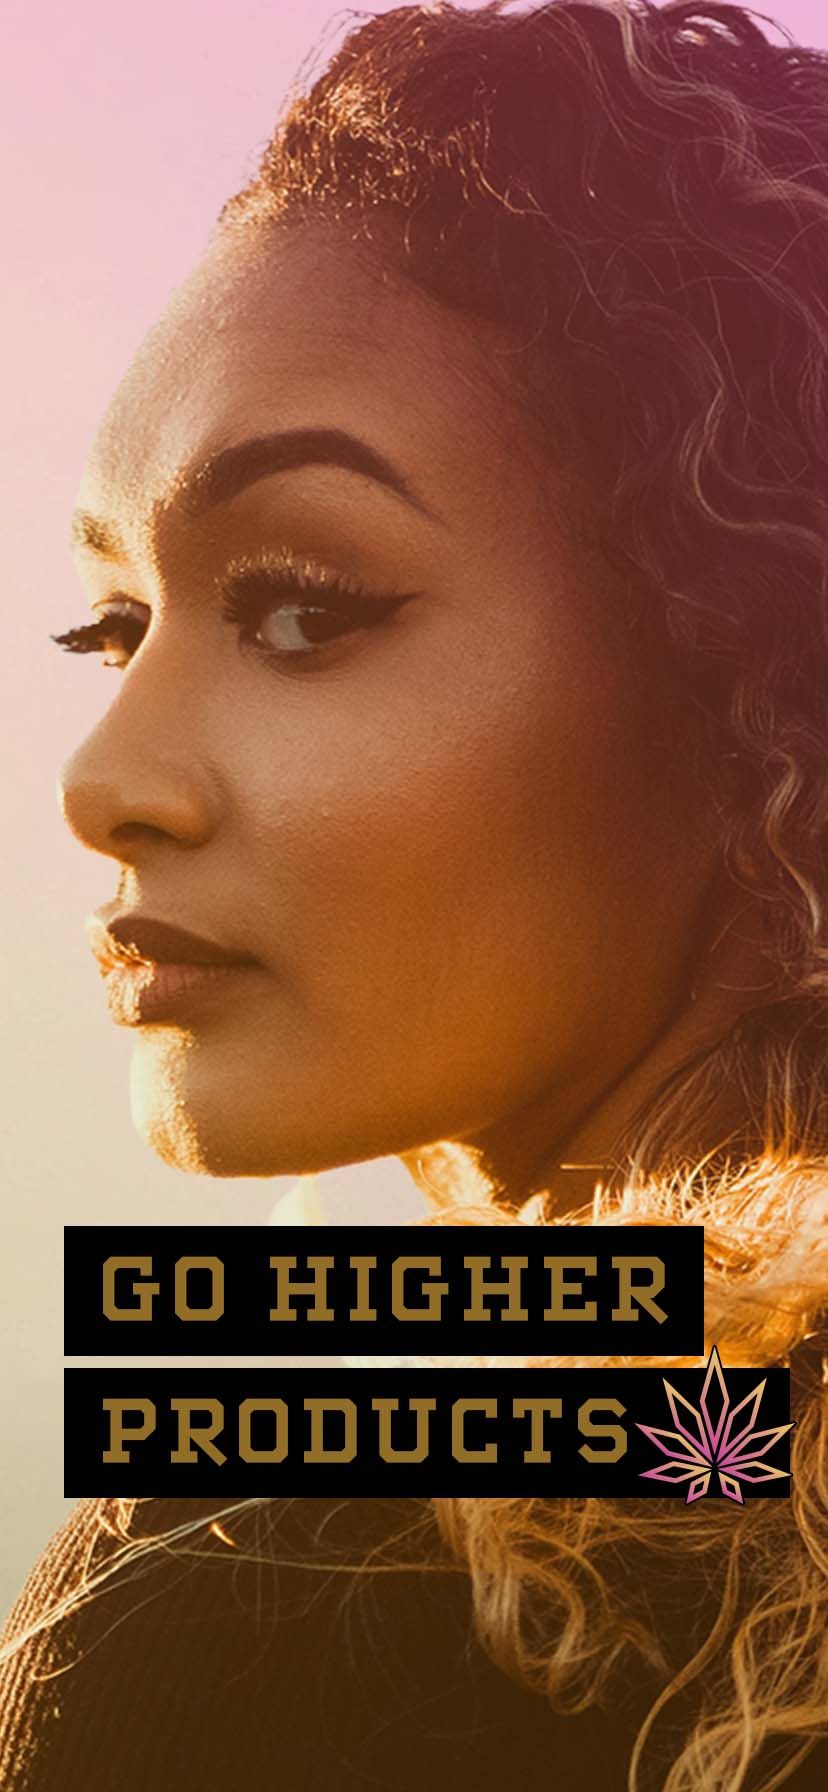 Go Higher Products